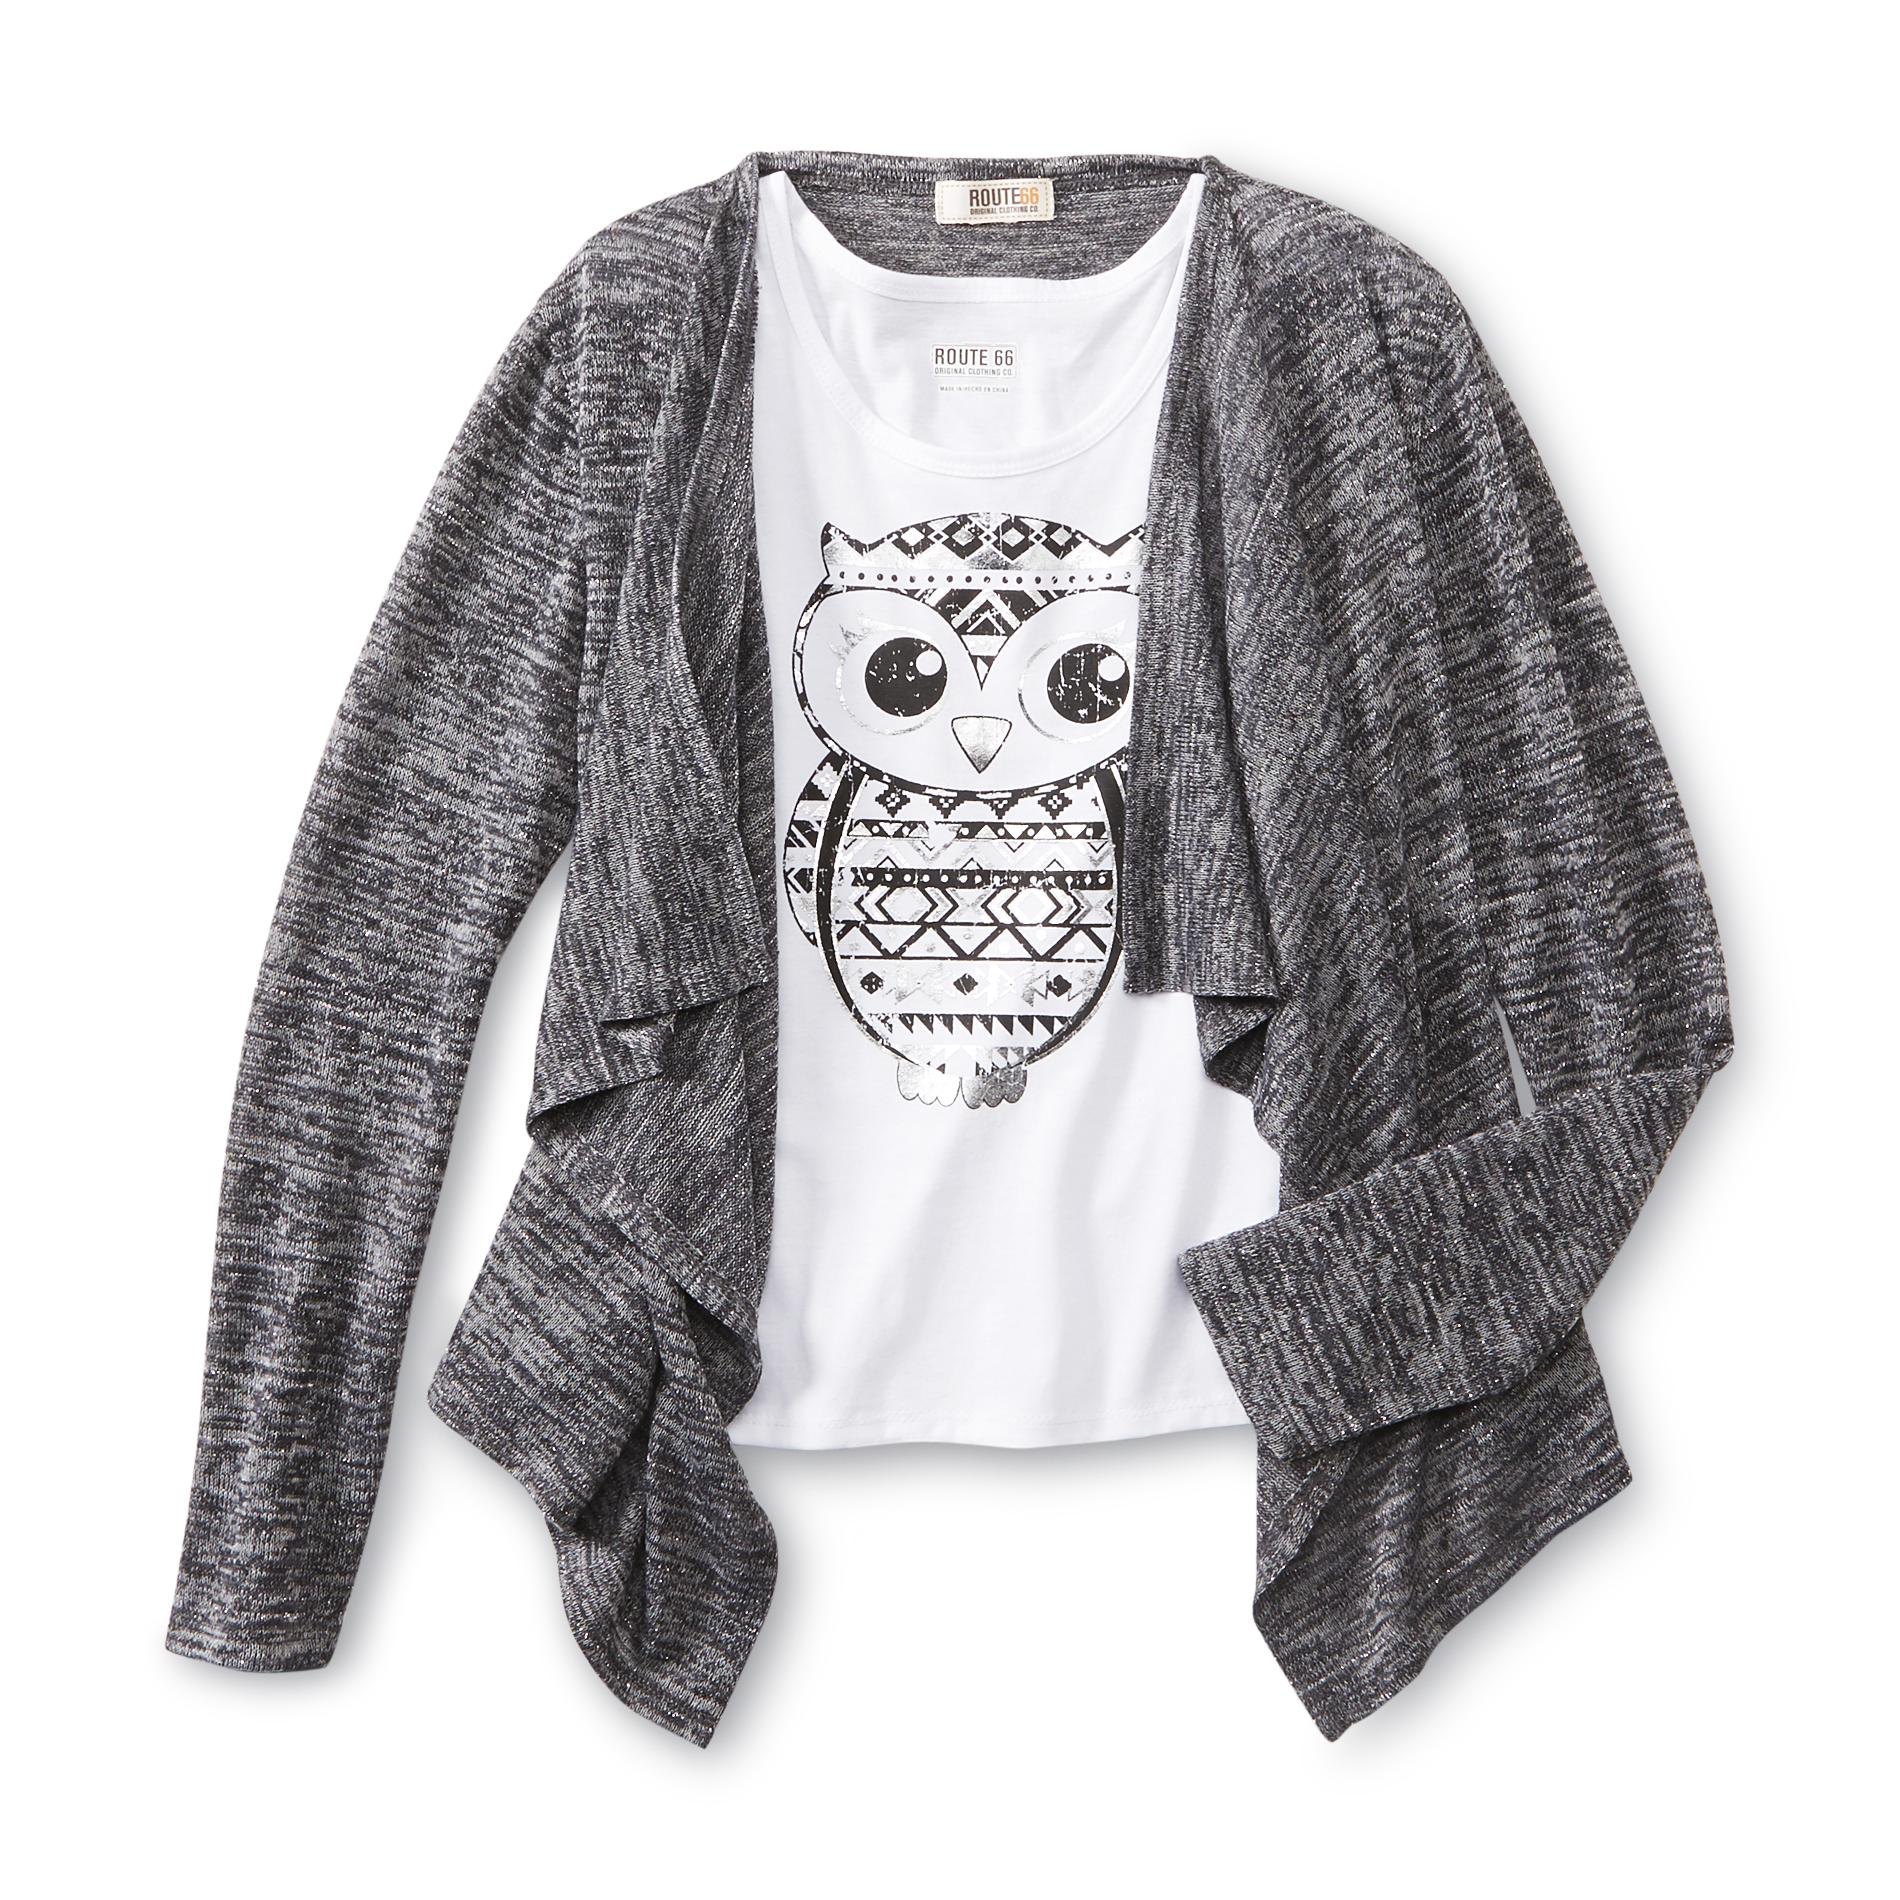 Route 66 Girl's Layered Look Cardigan Top - Owl